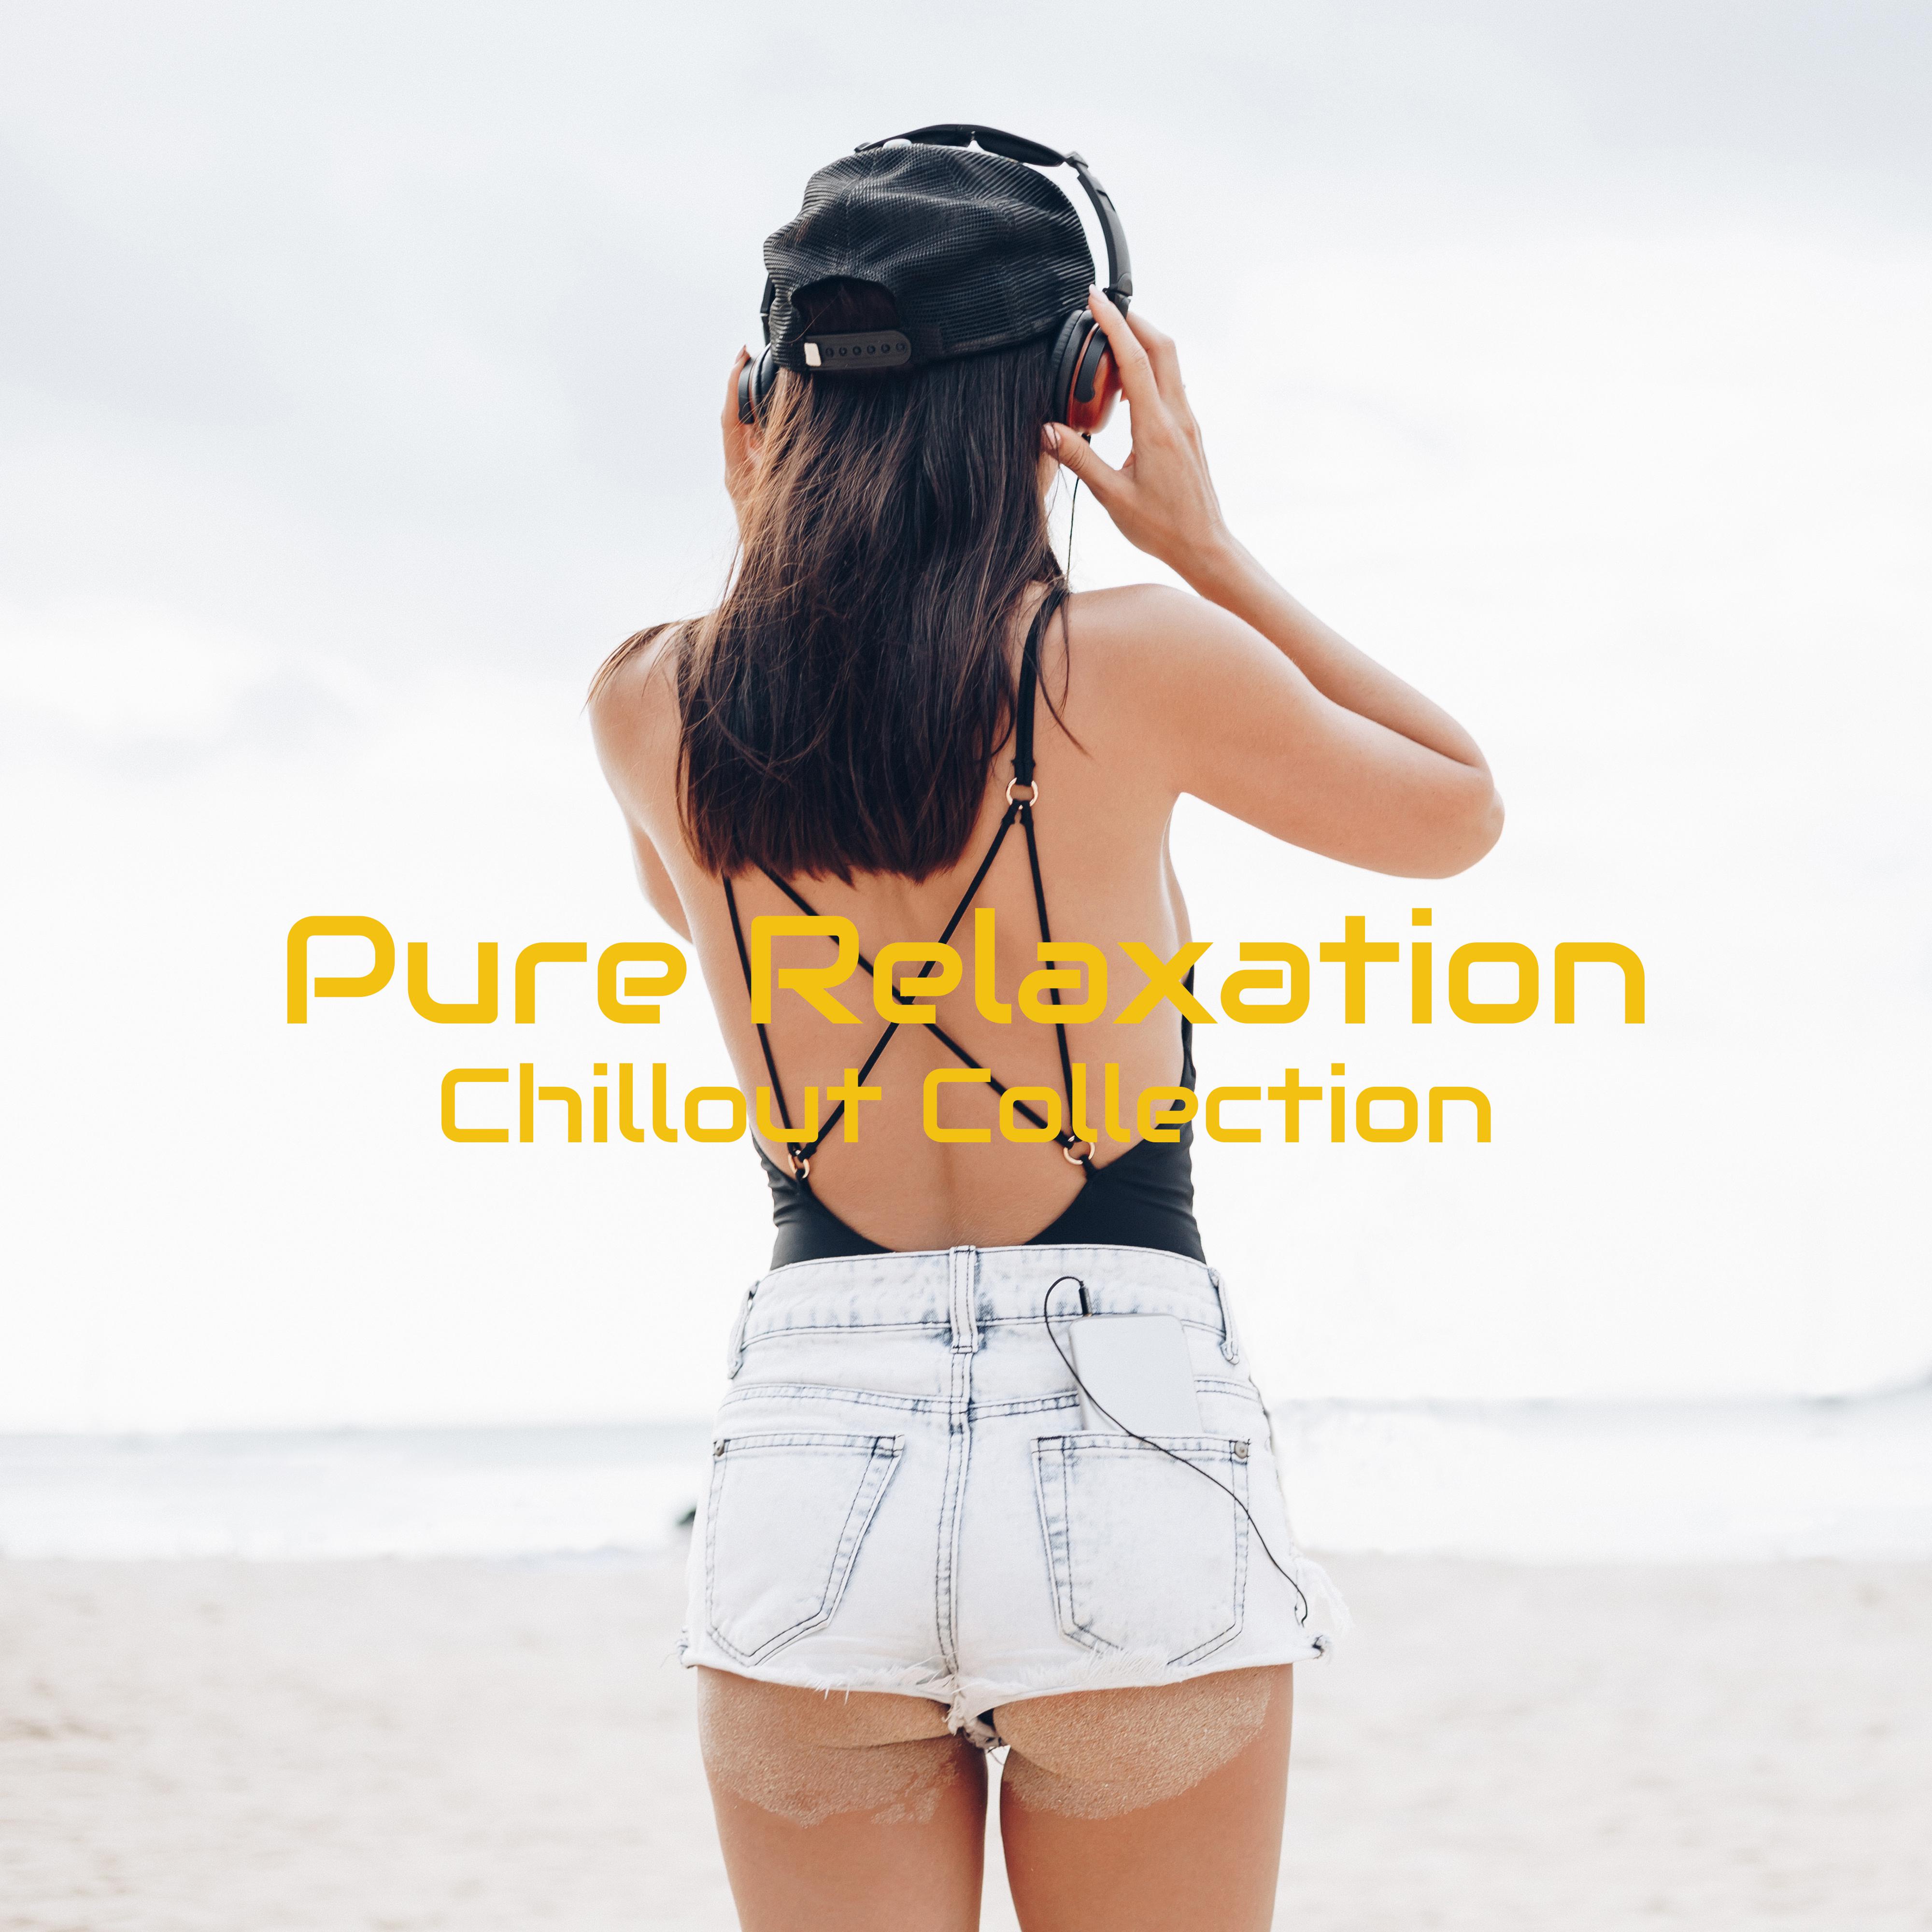 Pure Relaxation Chillout Collection: Ultimate Compilation of Top Chill Out Lounge Music